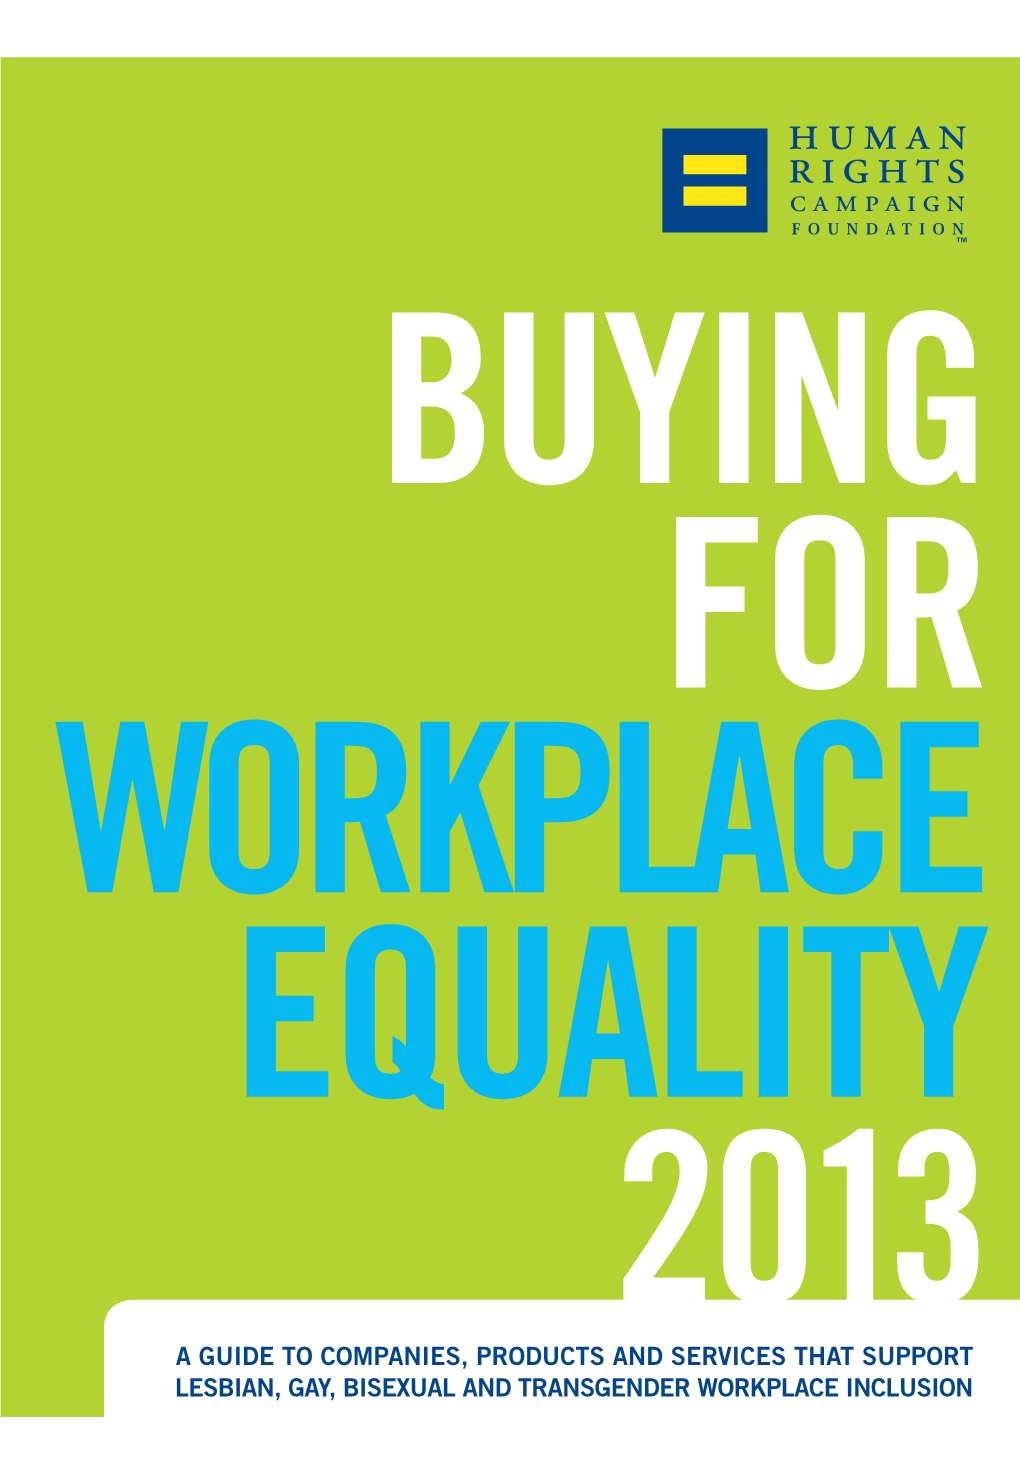 A Guide to Companies, Products and Services That Support Lesbian, Gay, Bisexual and Transgender Workplace Inclusion